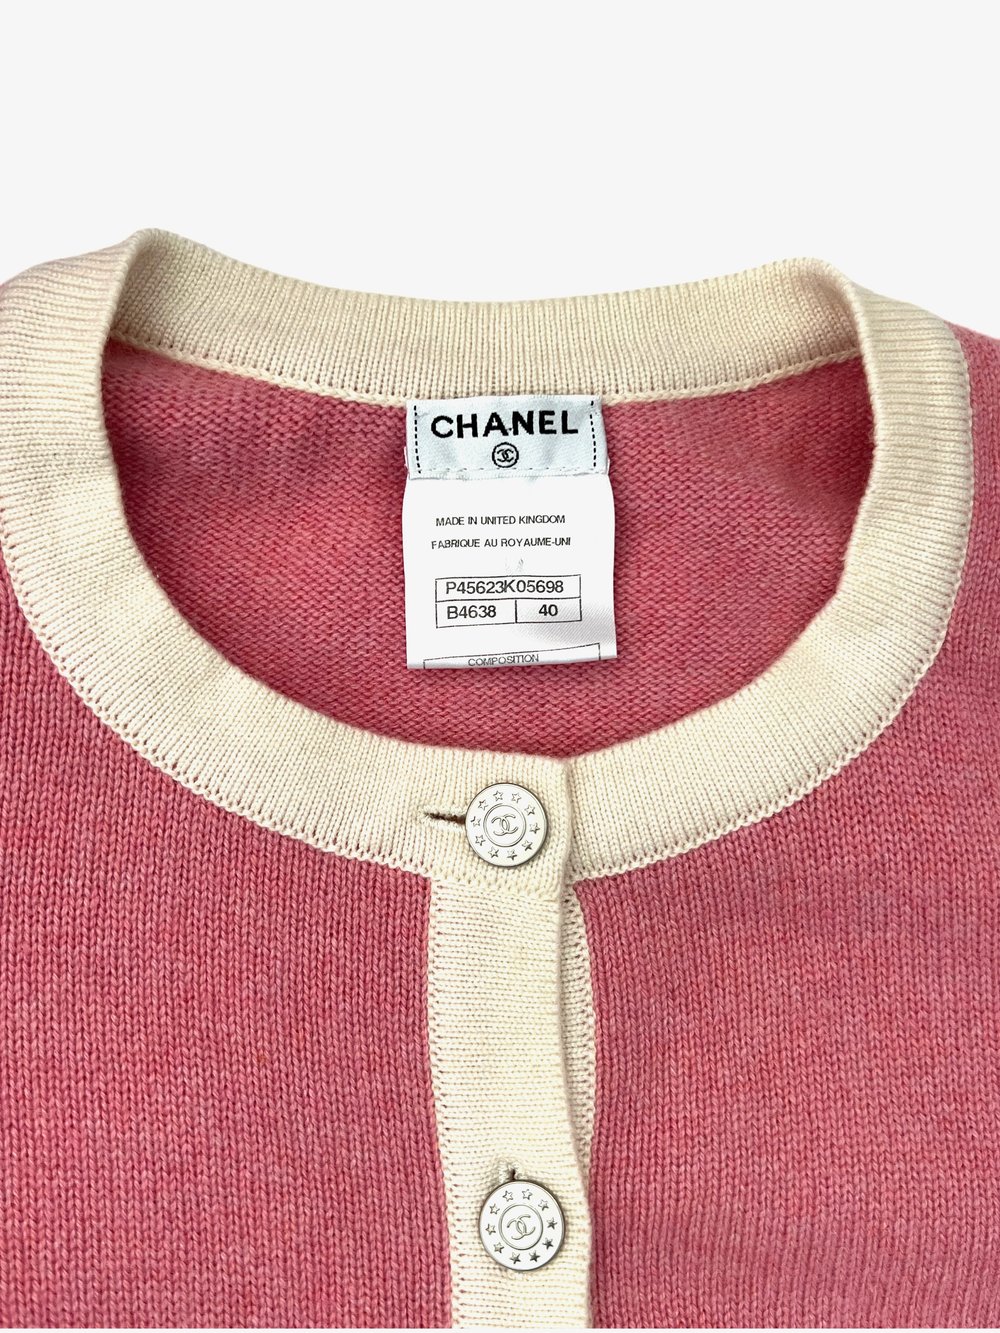 Chanel Pink Cashmere Cardigan Preowned Size 40 — Socialite Auctions